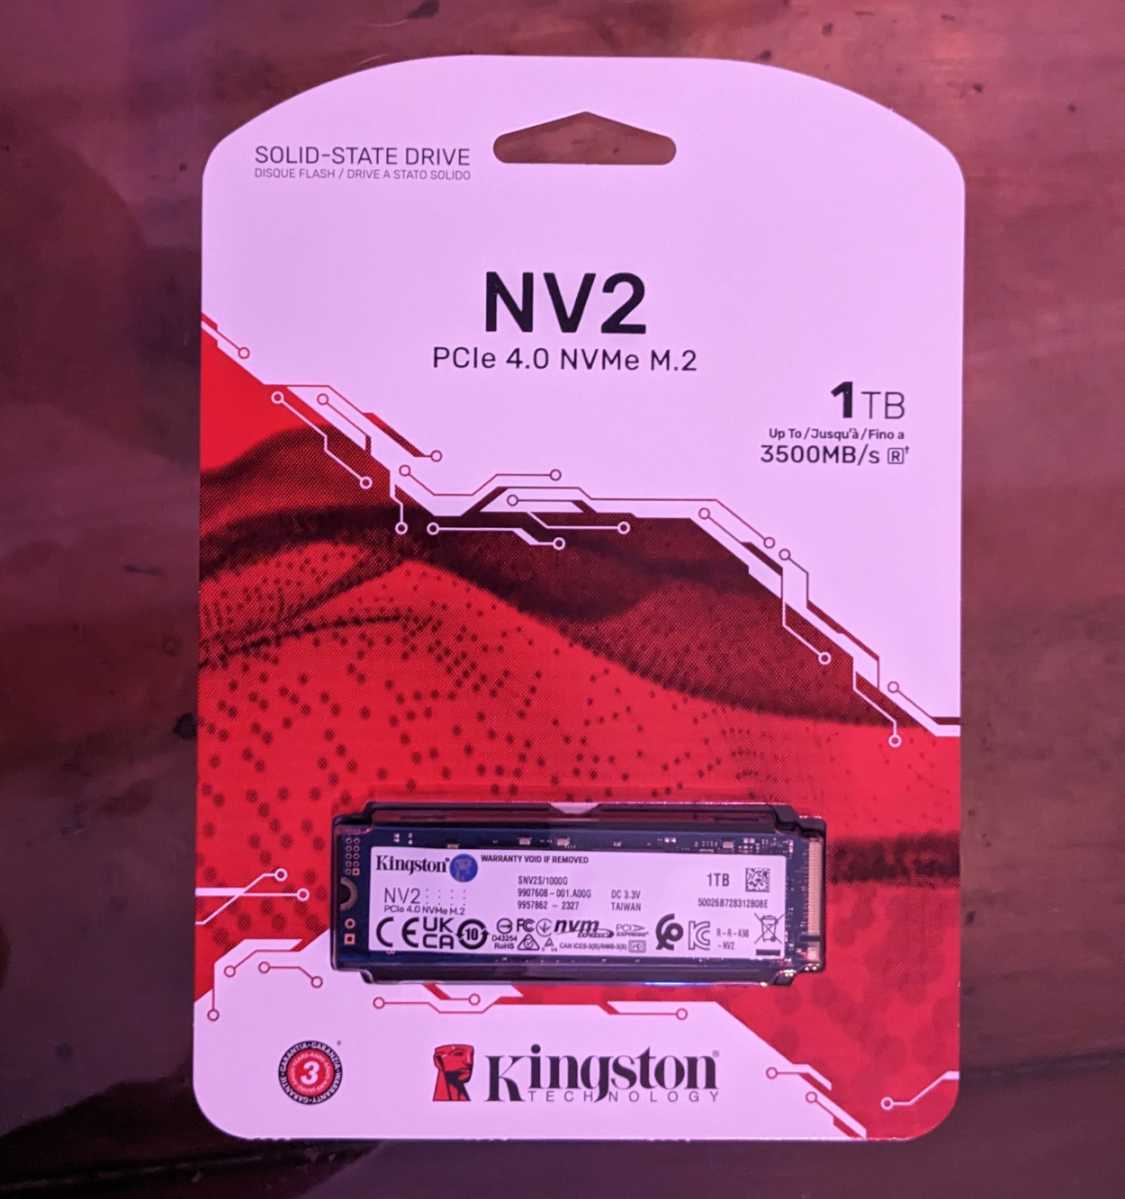 Kingston NV2 SSD review: PCIe 4.0 for penny pinchers